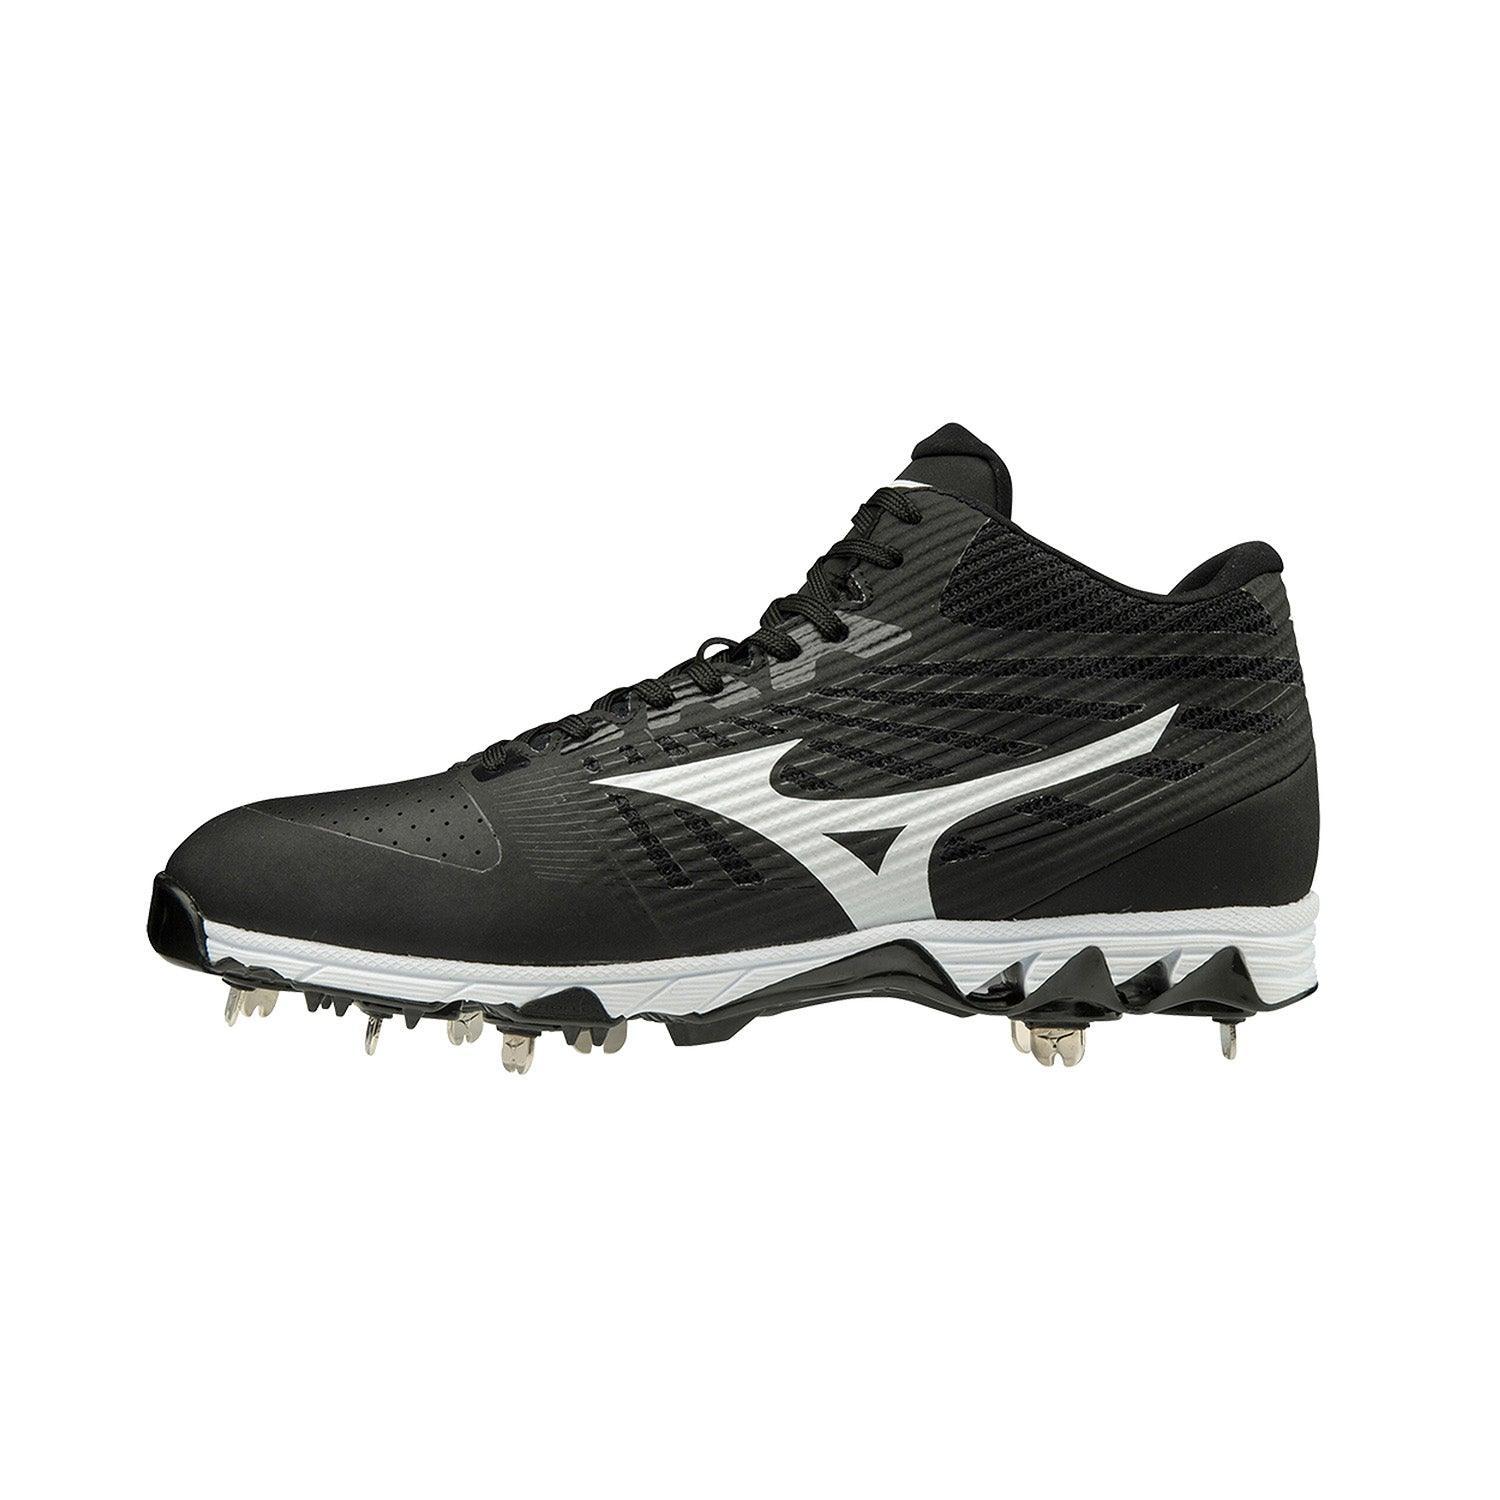 9-Spike Ambition Mid Metal Baseball Cleat - Sports Excellence